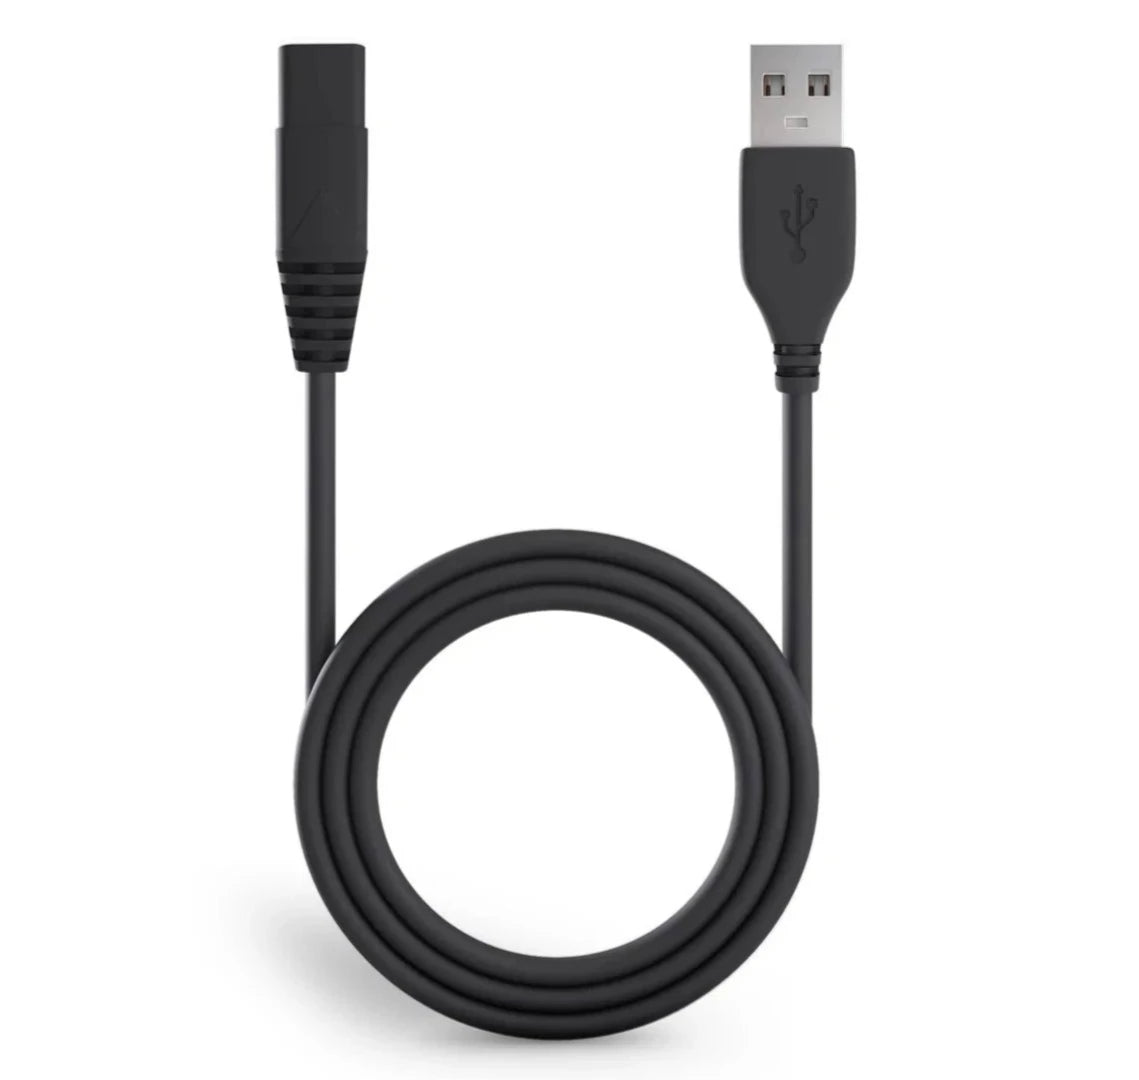 BaldiePro USB Charging Cable